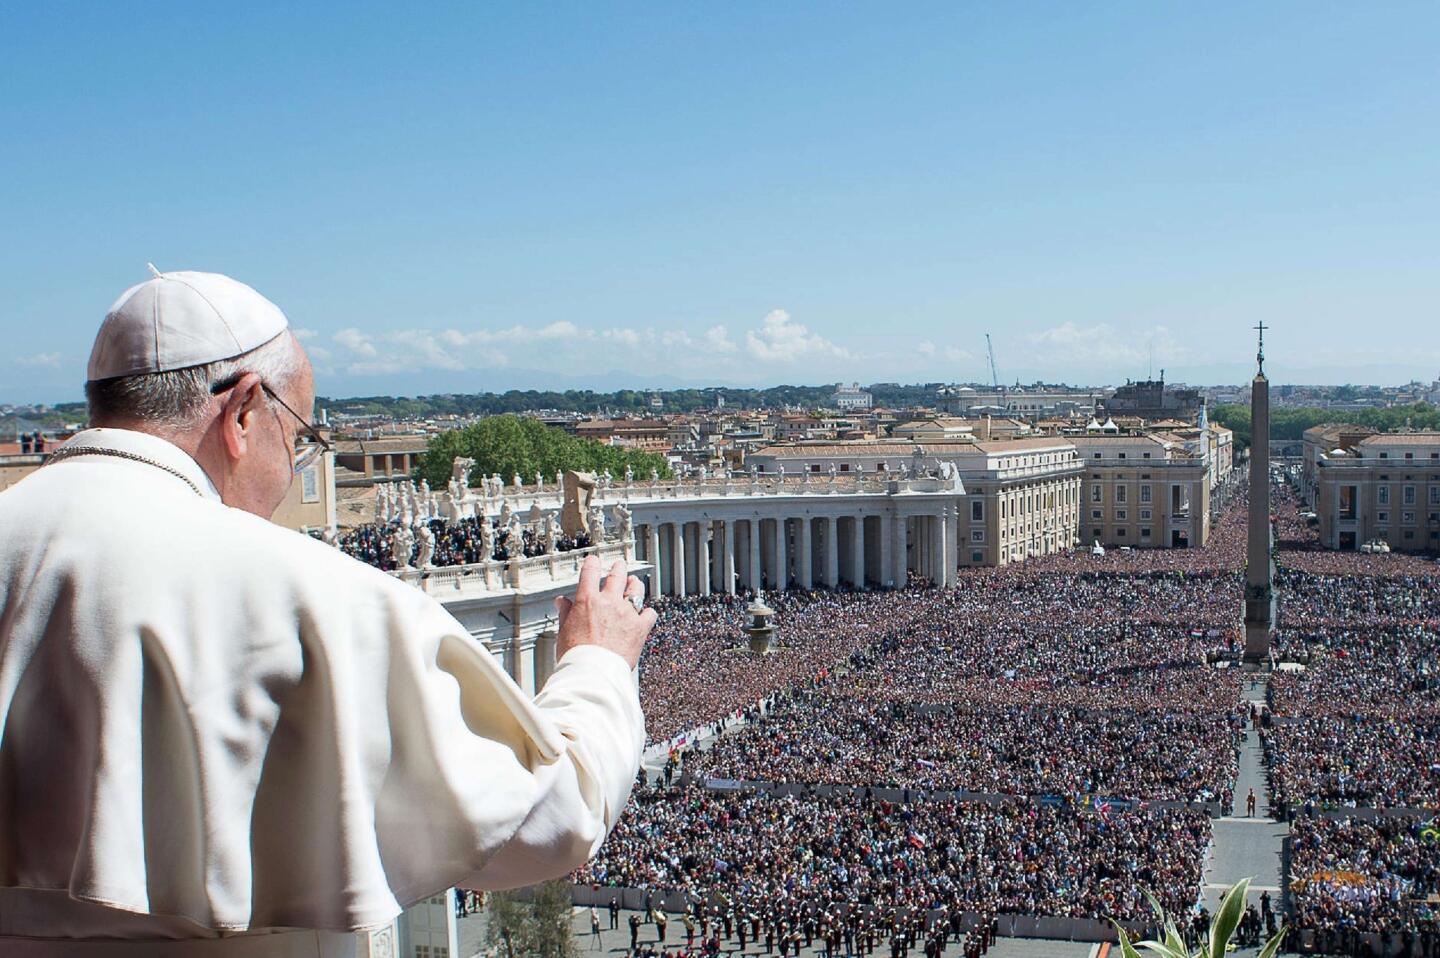 Pope Francis delivers the traditional blessing for Rome and the world from the balcony of St. Peter's Basilica during Easter celebrations.